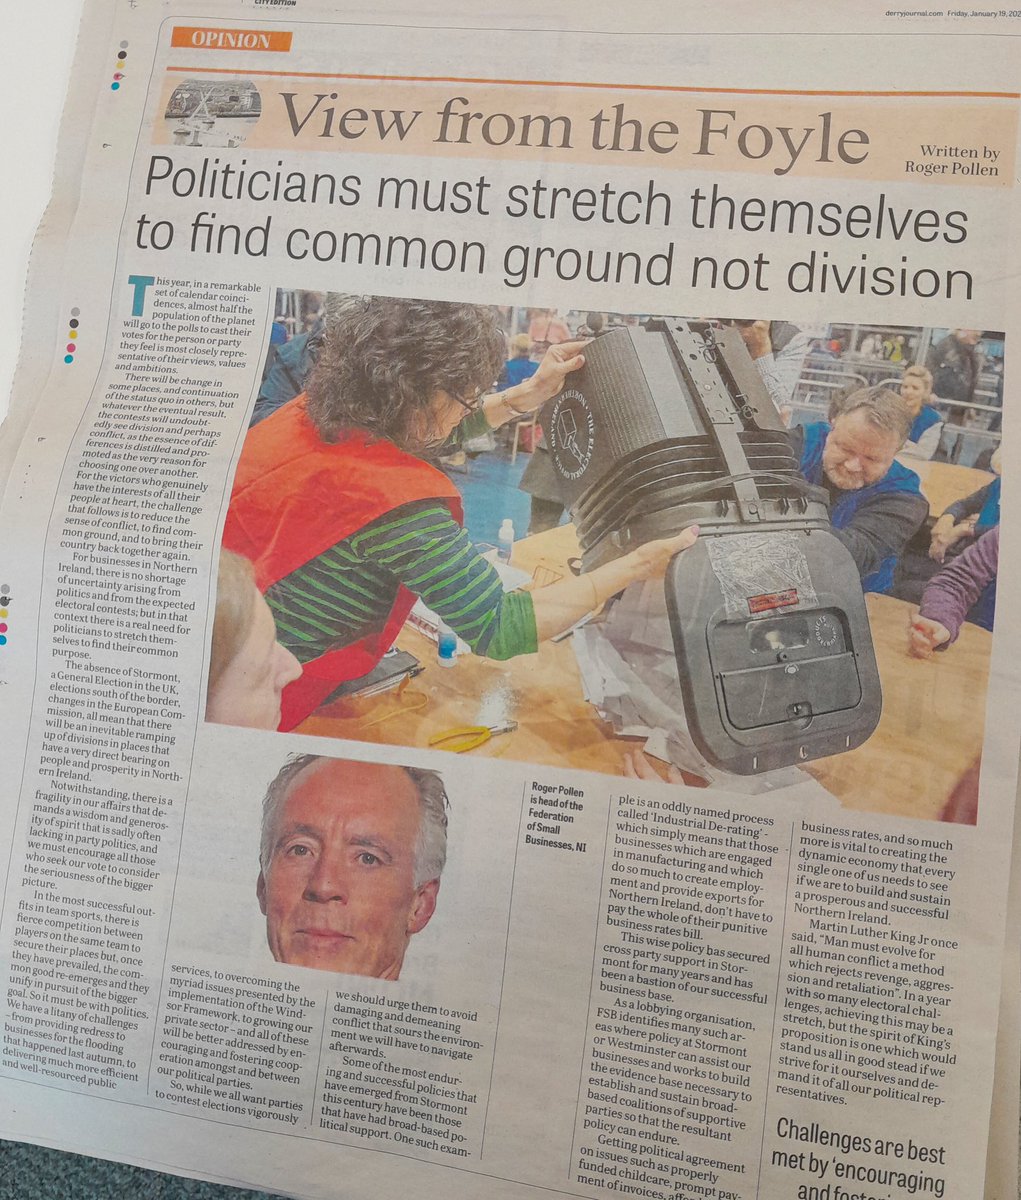 ✍️As we face into another year of electoral contests, Roger Pollen, Head of @FSB_NI, writes in the @derryjournal, citing a quote from Martin Luther King jr - “Man must evolve for all human conflict a method which rejects revenge, aggression and retaliation”. As businesses face…